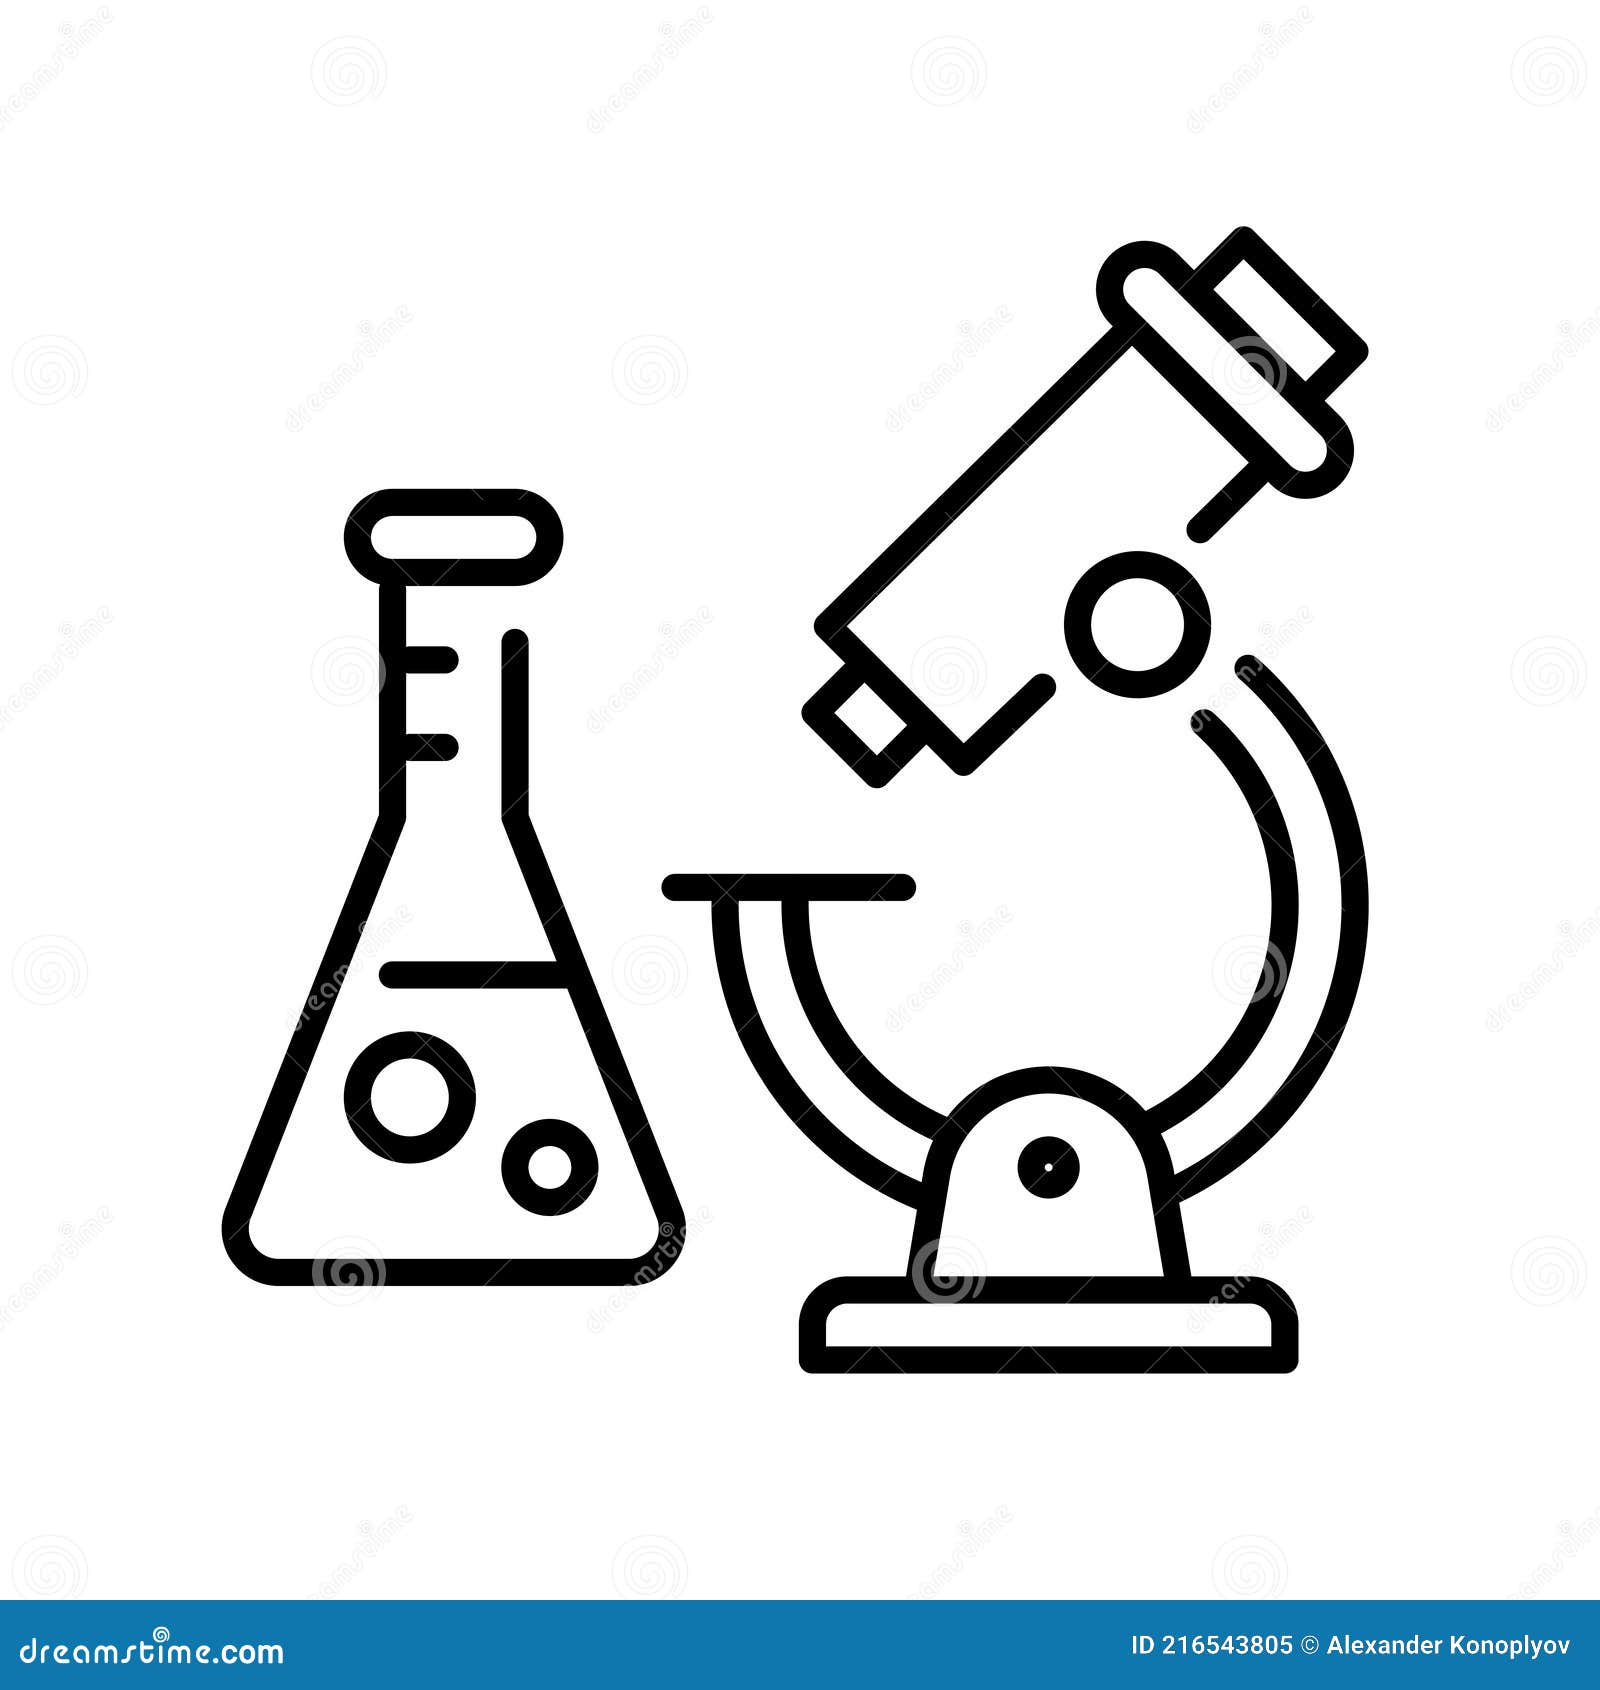 monochrome icon of practical work at chemical lab   microscope and beaker